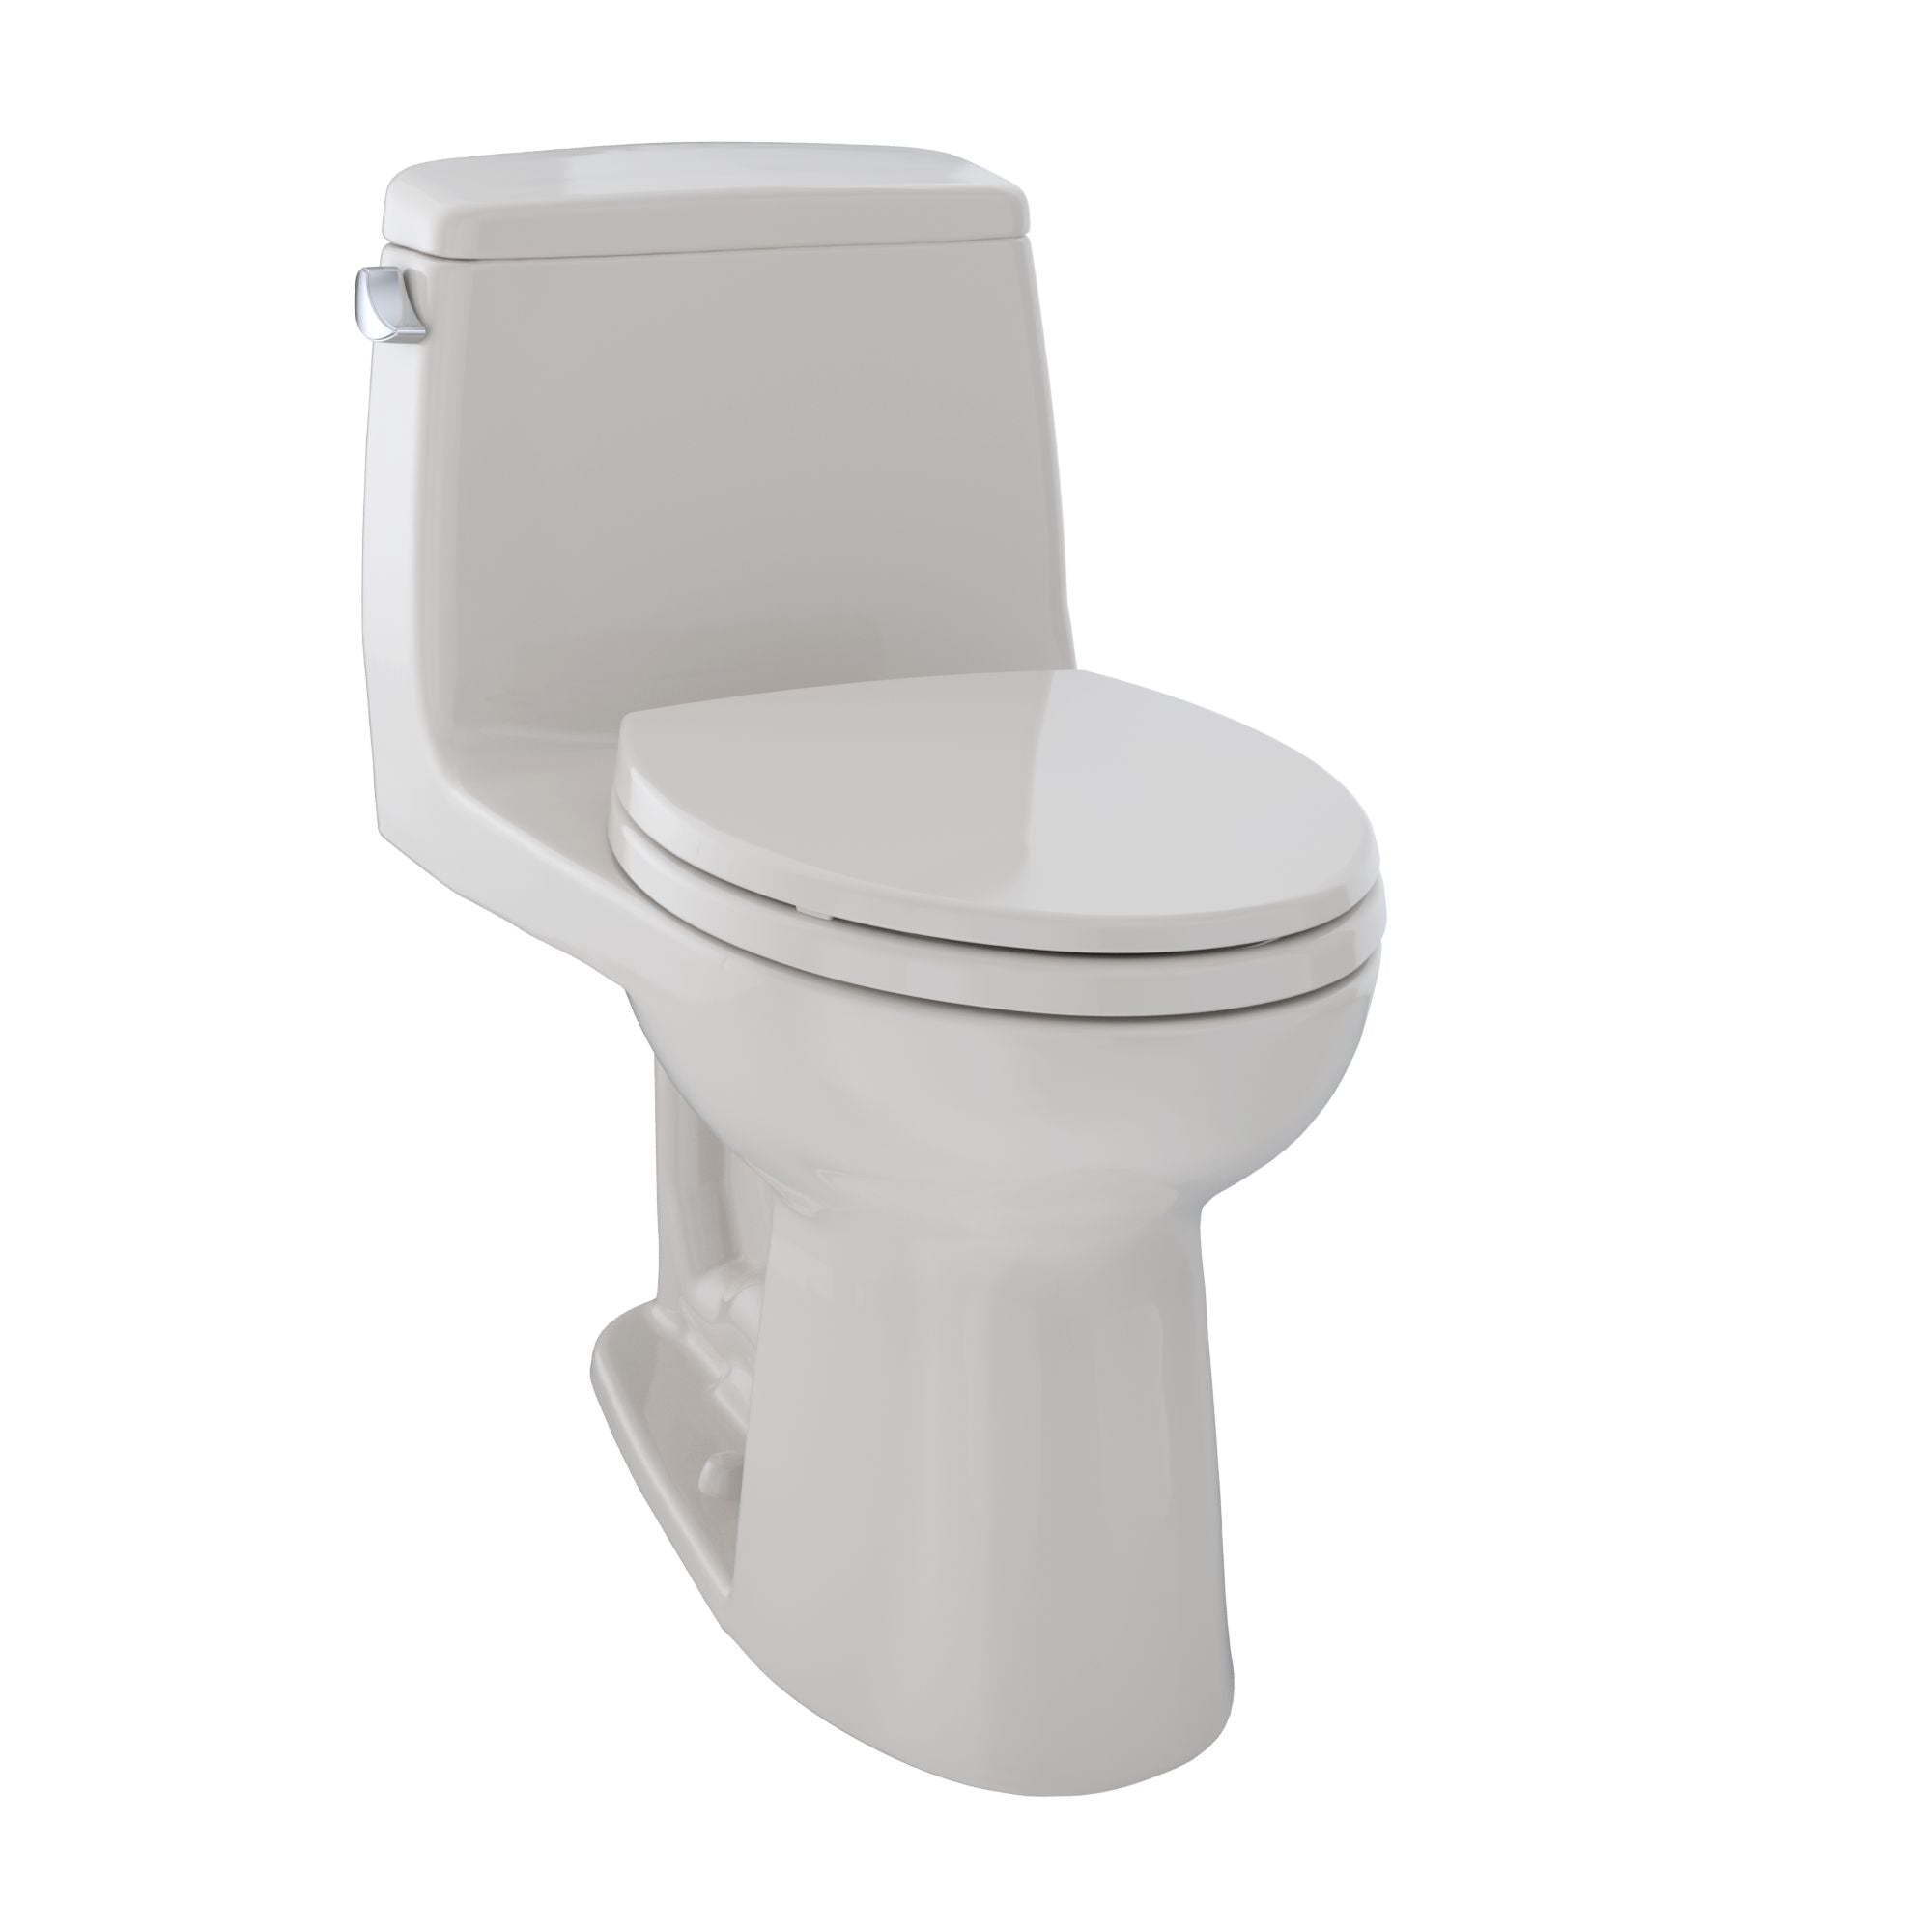 Toto Ultramax One-piece Toilet 1.6 GPF Elongated Bowl